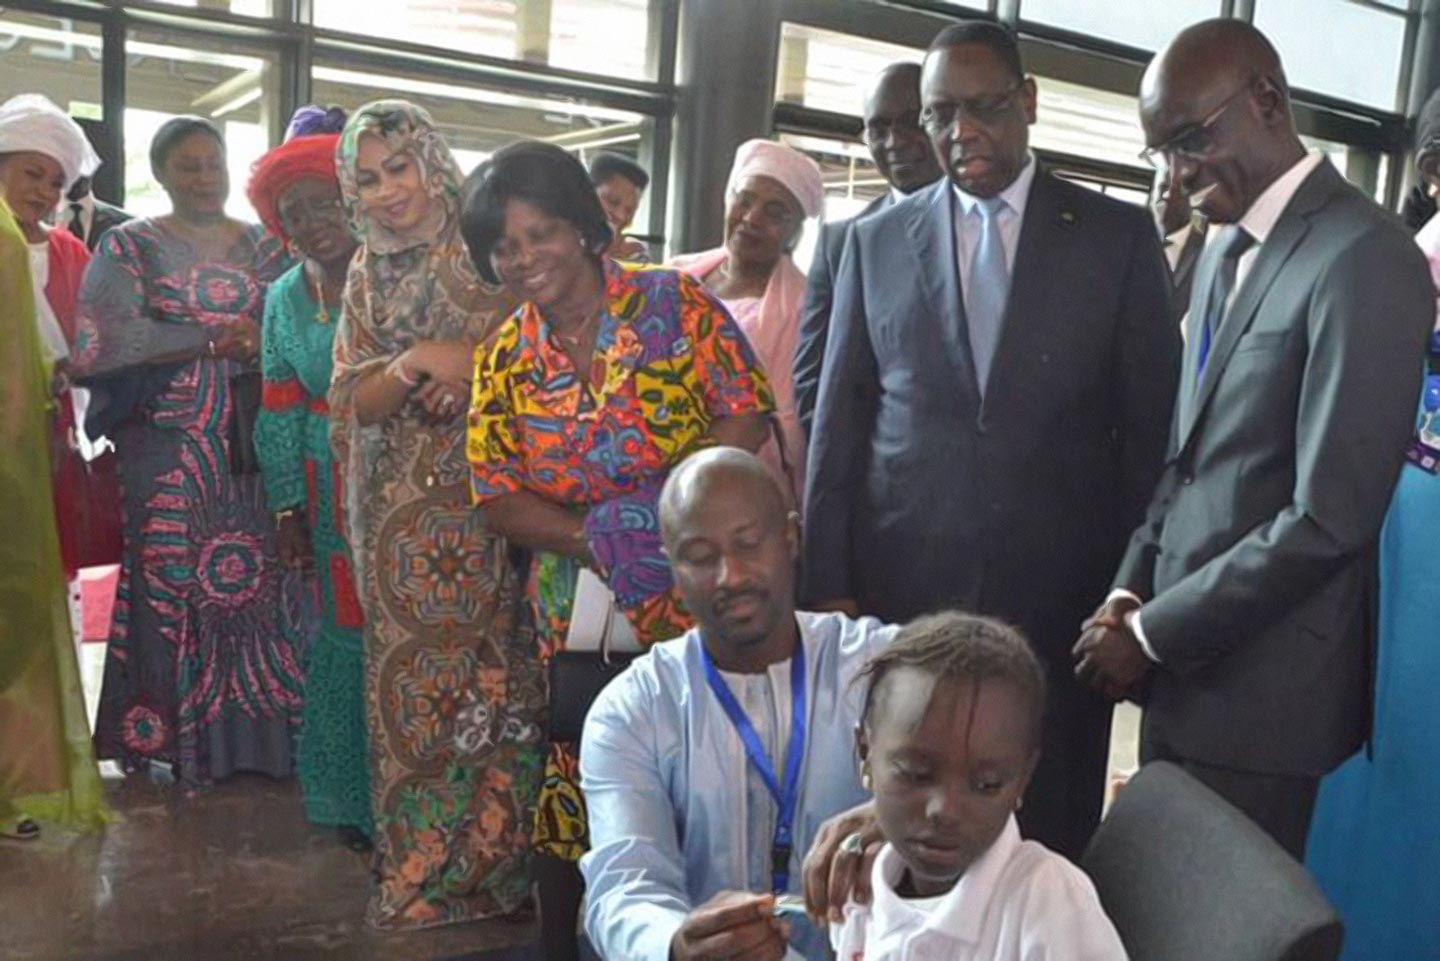 The president of Senegal attends the first HPV vaccination during a high-level event. Credit : MSAS